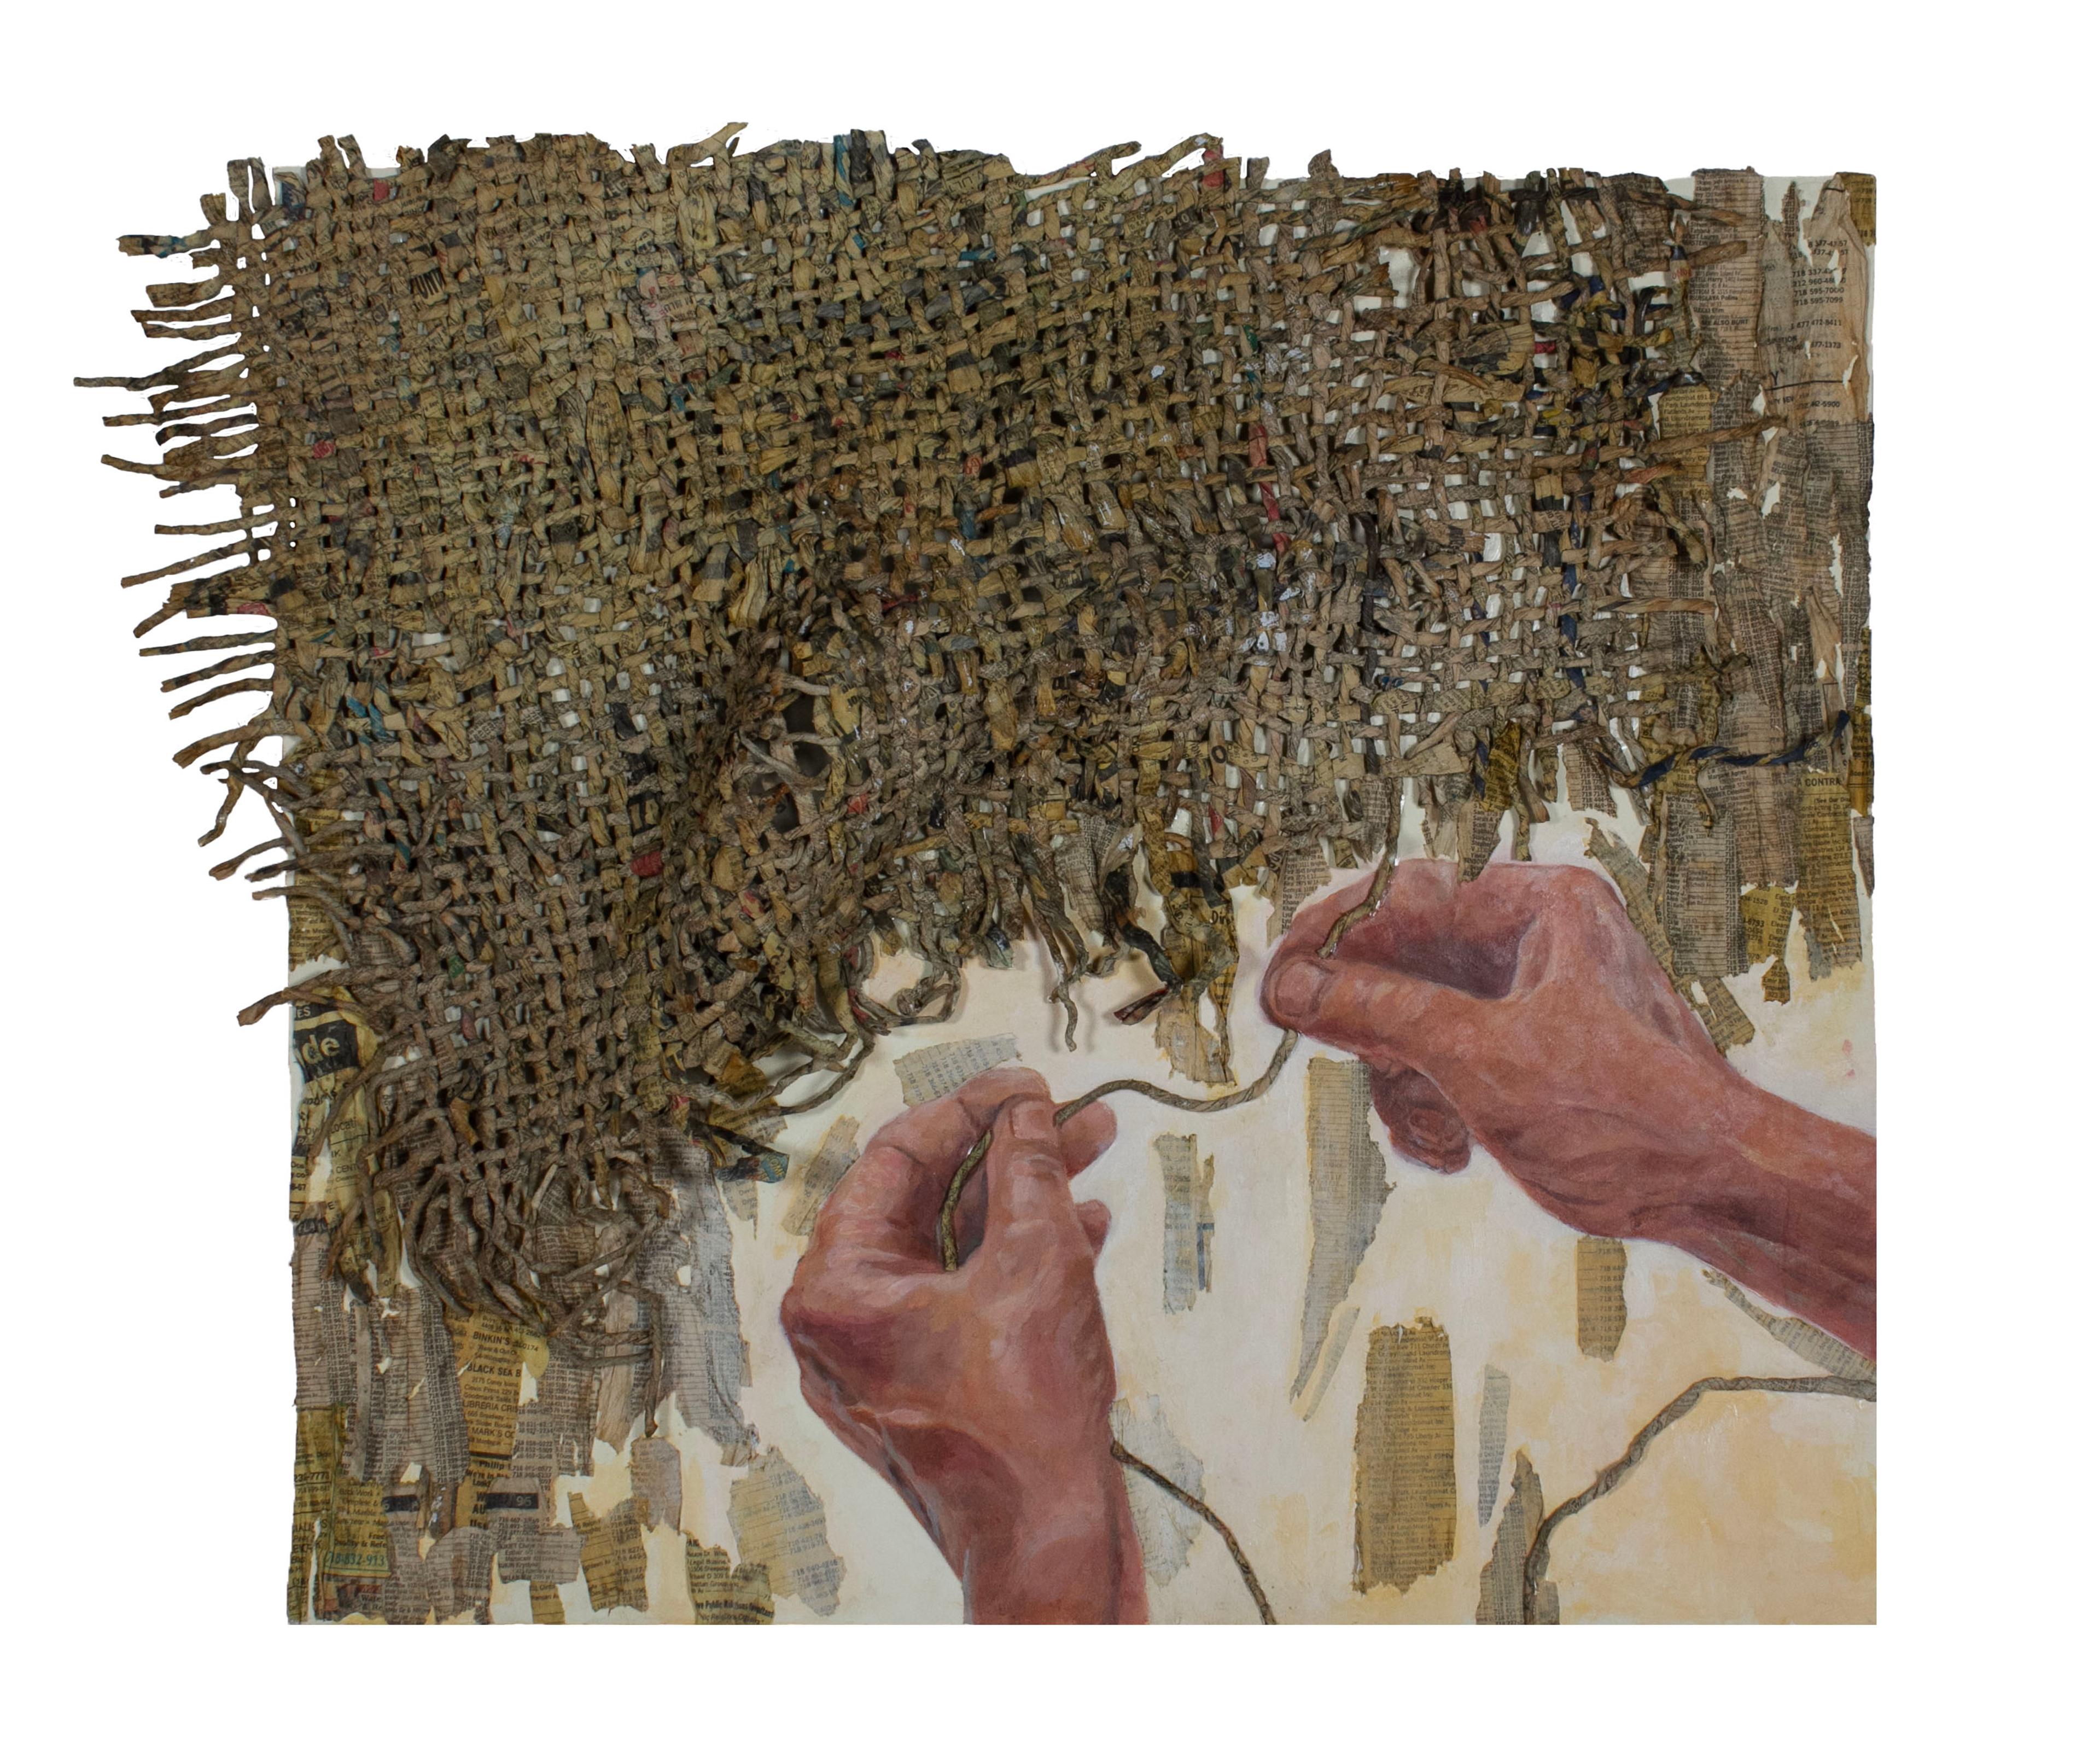 Painting of a pair of hands weaving made from acrylic and phone-book paper on Bristol Board. The hands, at bottom right, weave a narrow strip of paper into a much larger tapestry of interlaced, brown woven paper that takes up the entire top half of the canvas. Frayed paper strips stick off the edges of the canvas at the top and left.